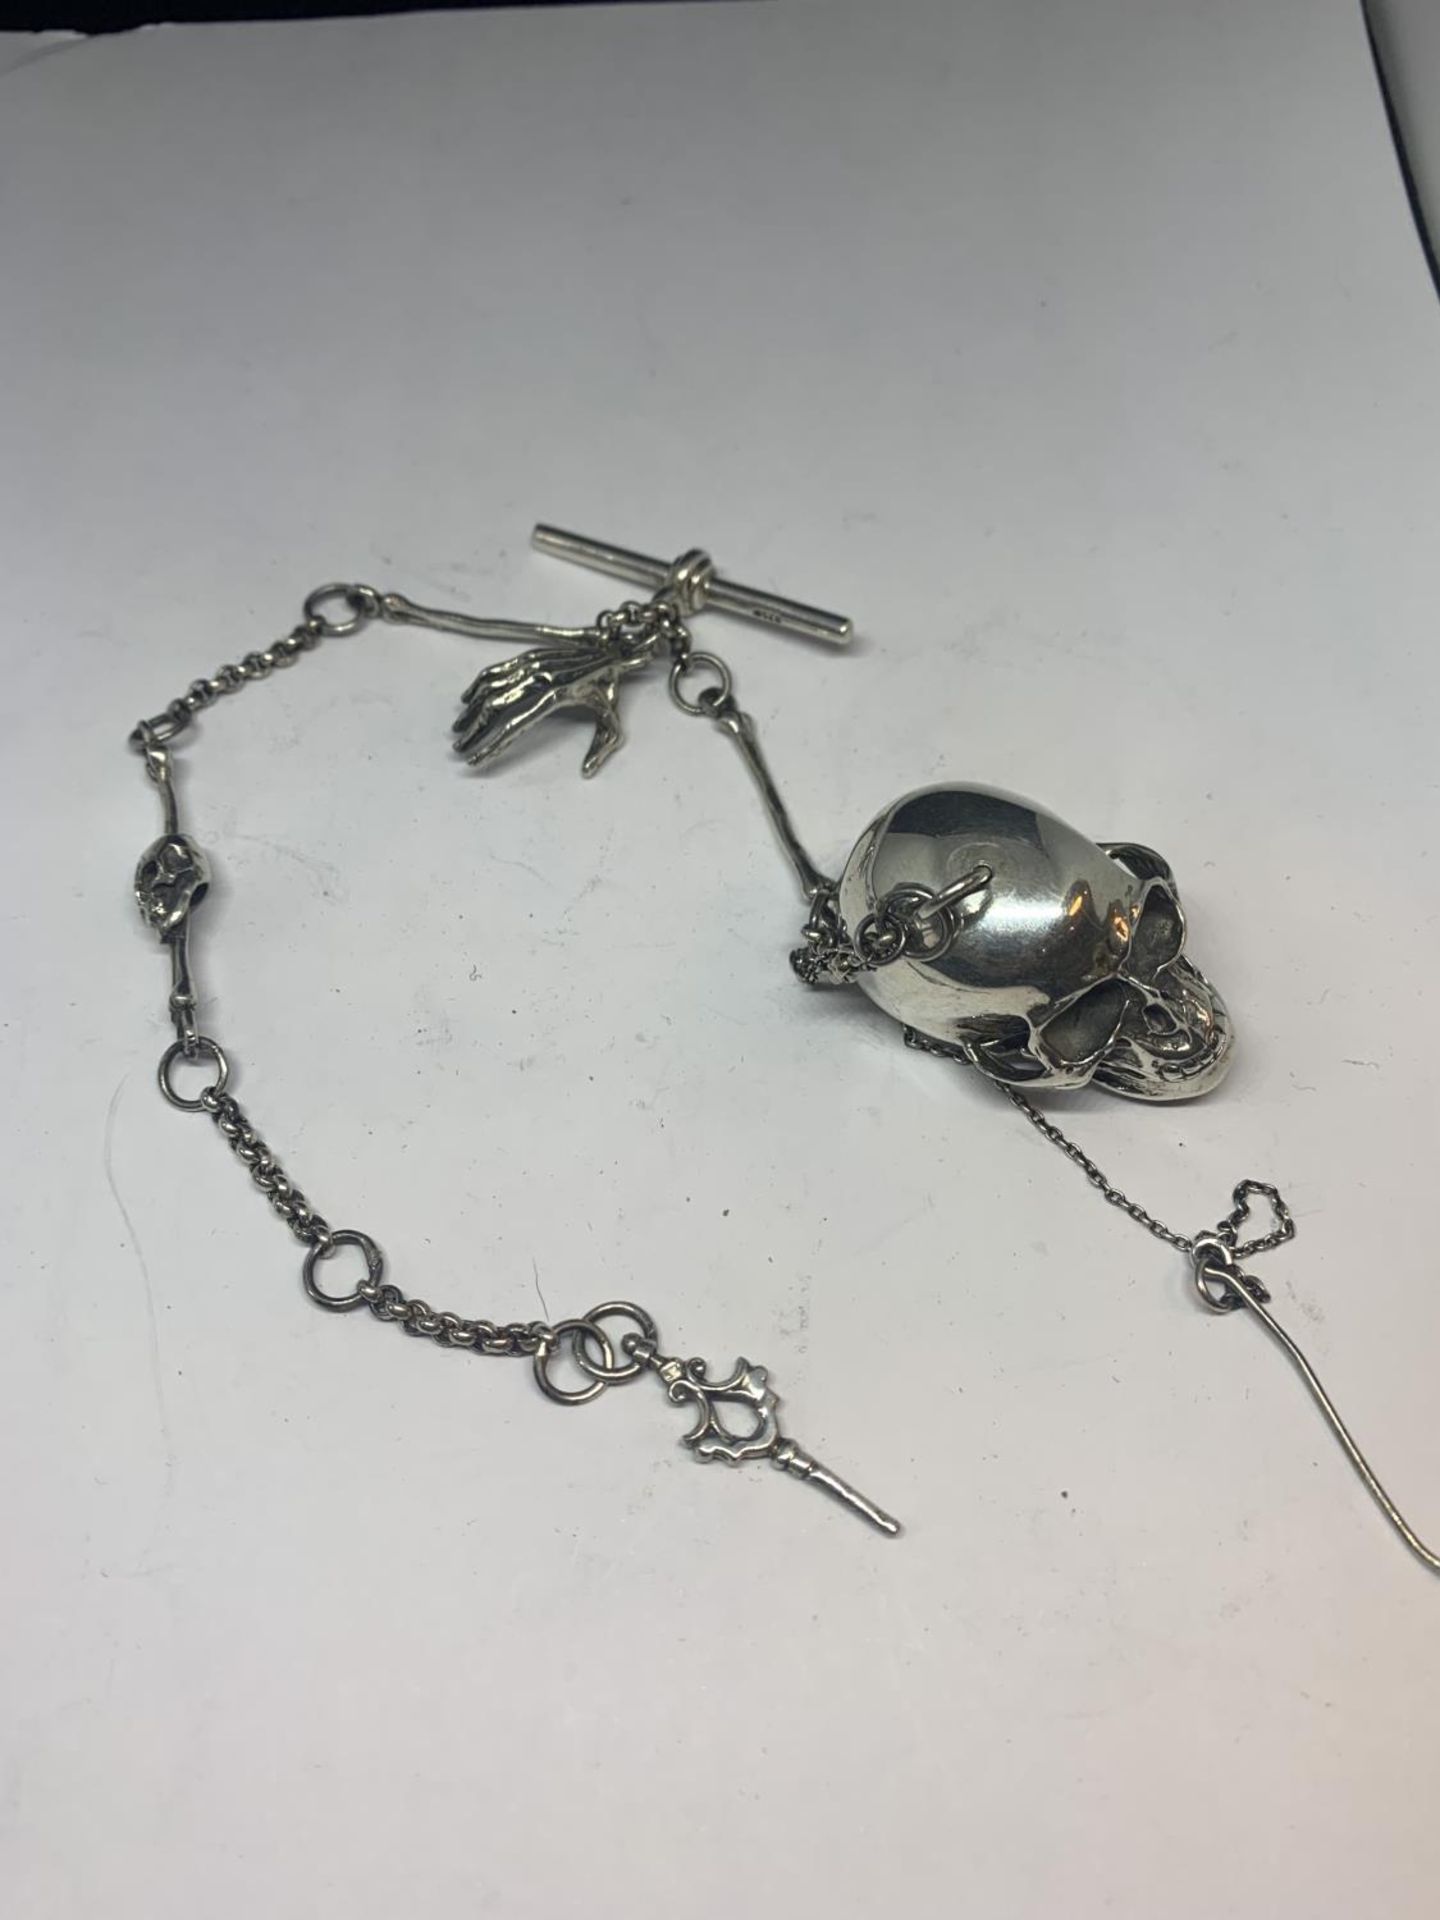 A HEAVY SILVER ALBERT CHAIN WITH LARGE SKULL FOB AND BONE, HAND ETC DESIGN